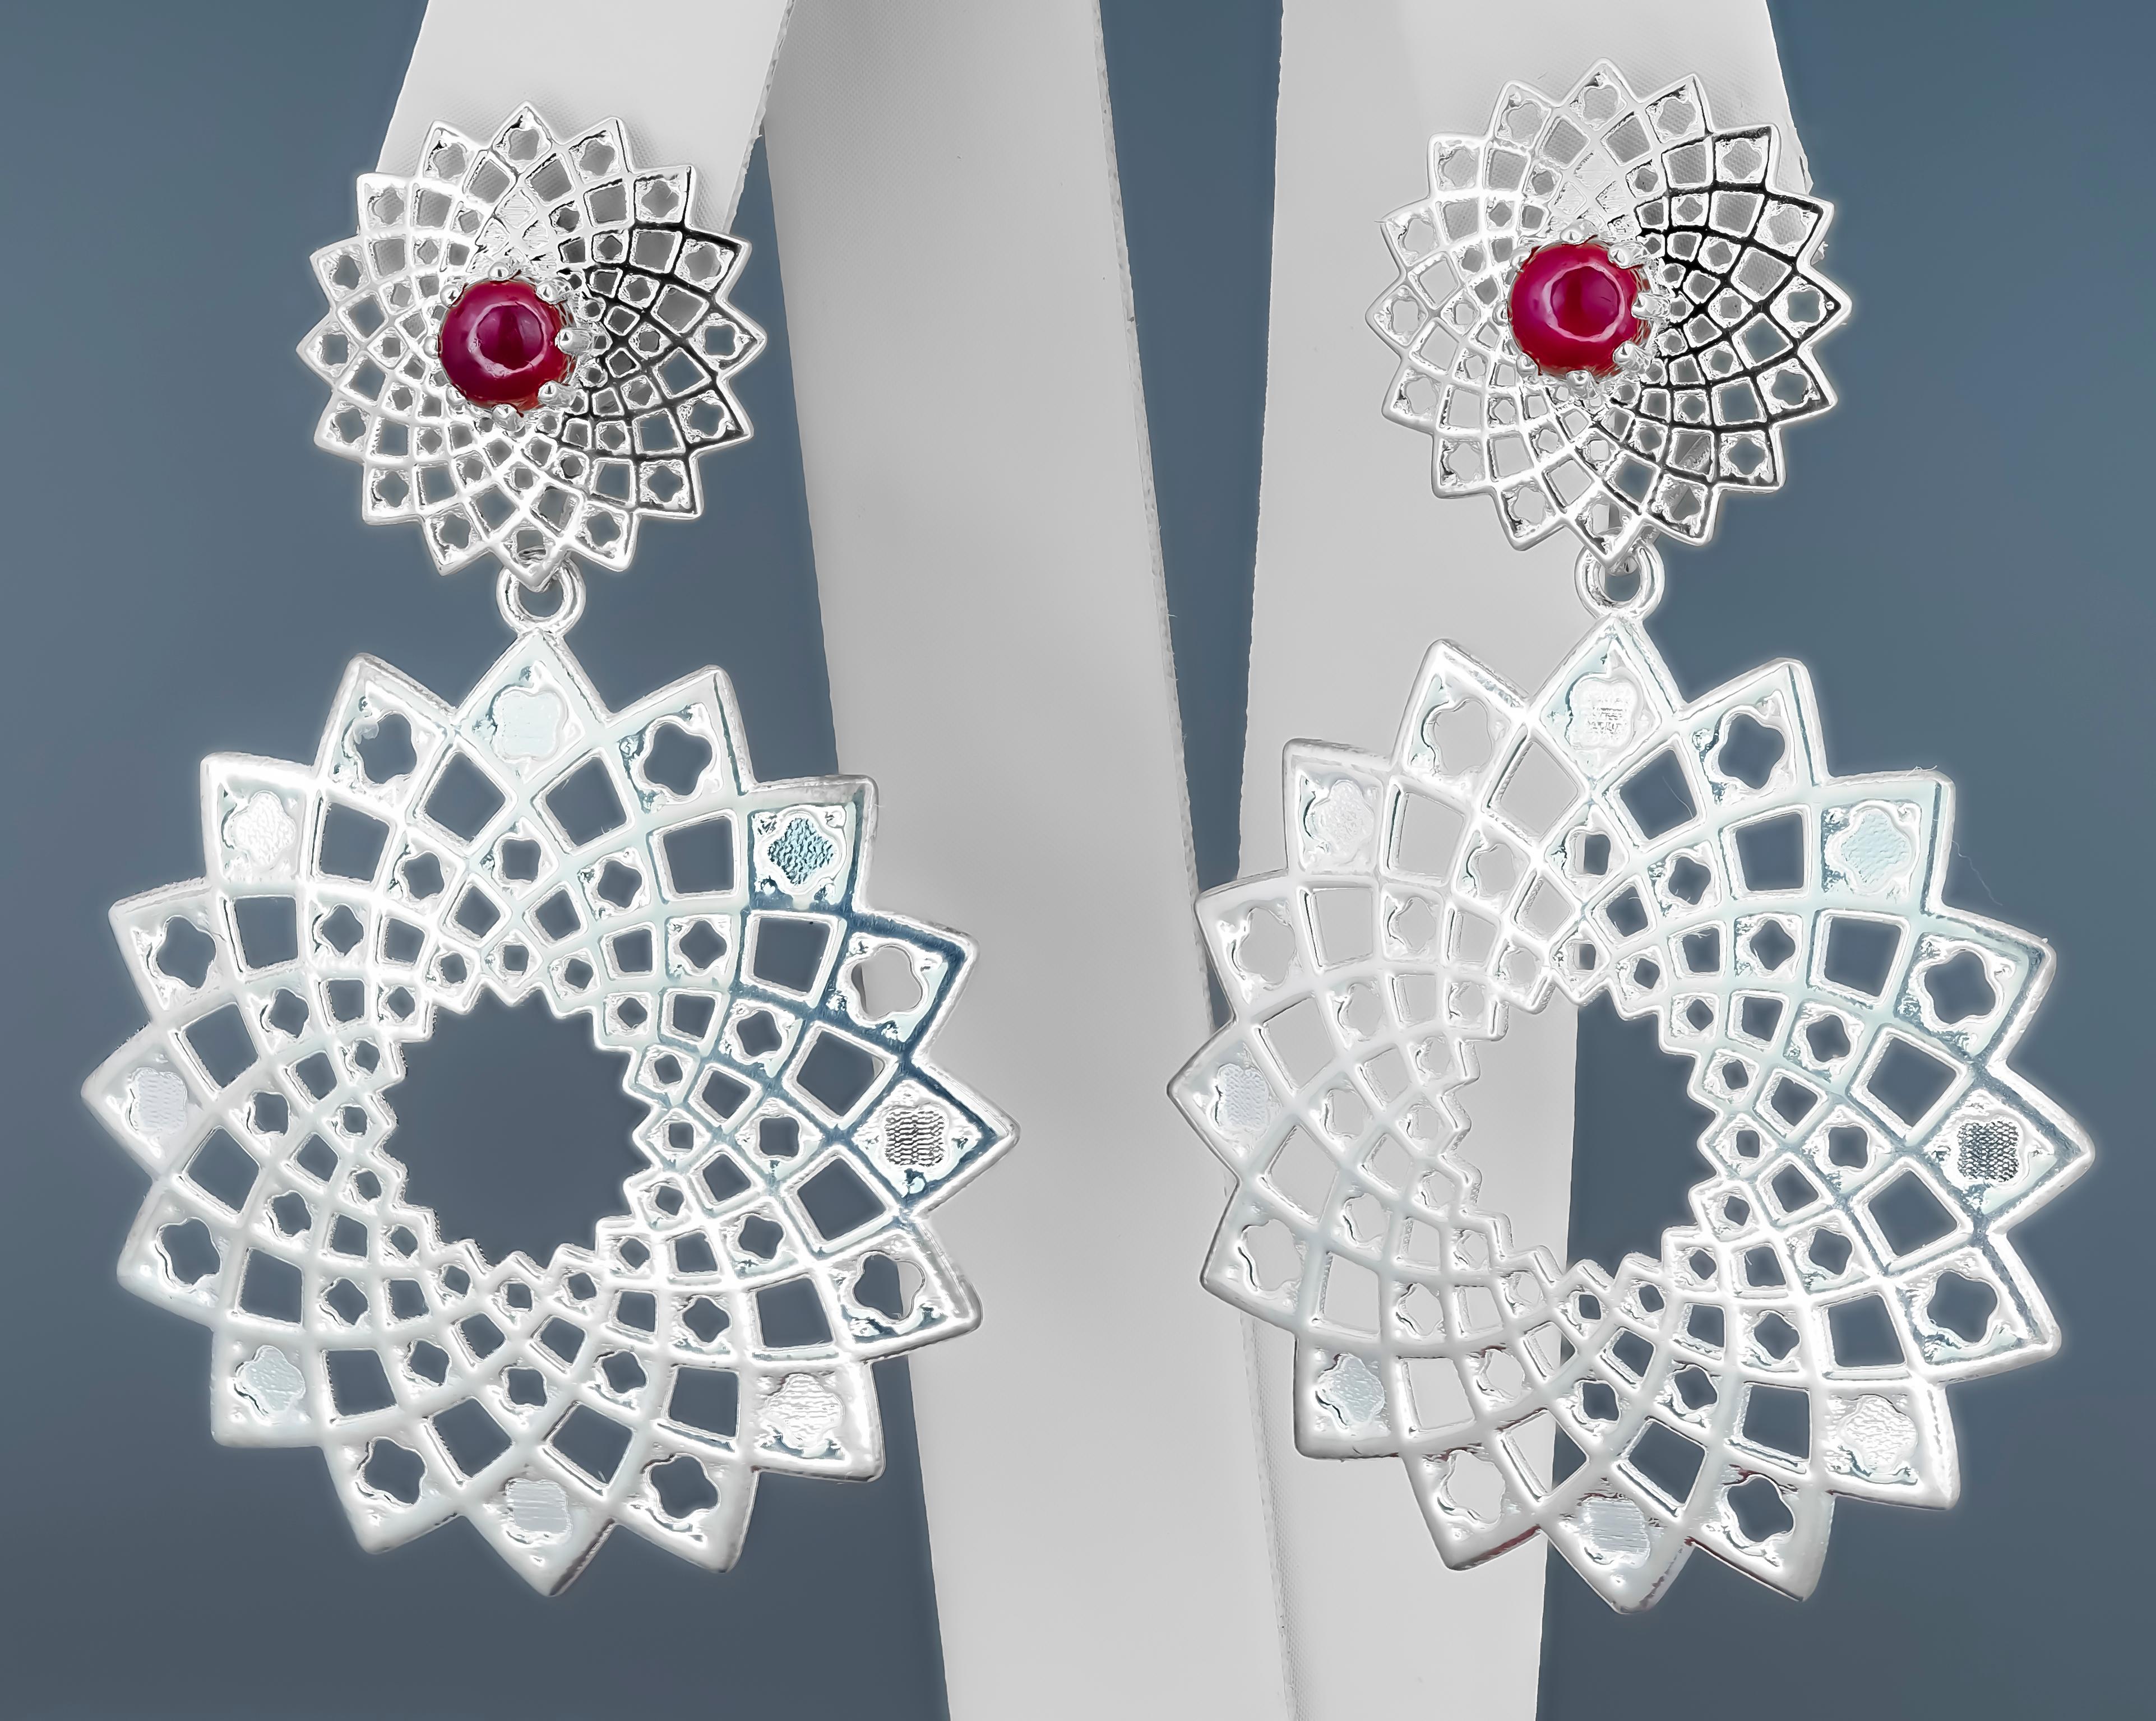 Natural rubies earrings. 

Massive earrings with rubies. 
Different type wearring massive earrings with rubies - lower part removable. 
You can wear earring in different ways: as studs (for everyday wearring) and as a massive earrings. 
You can see